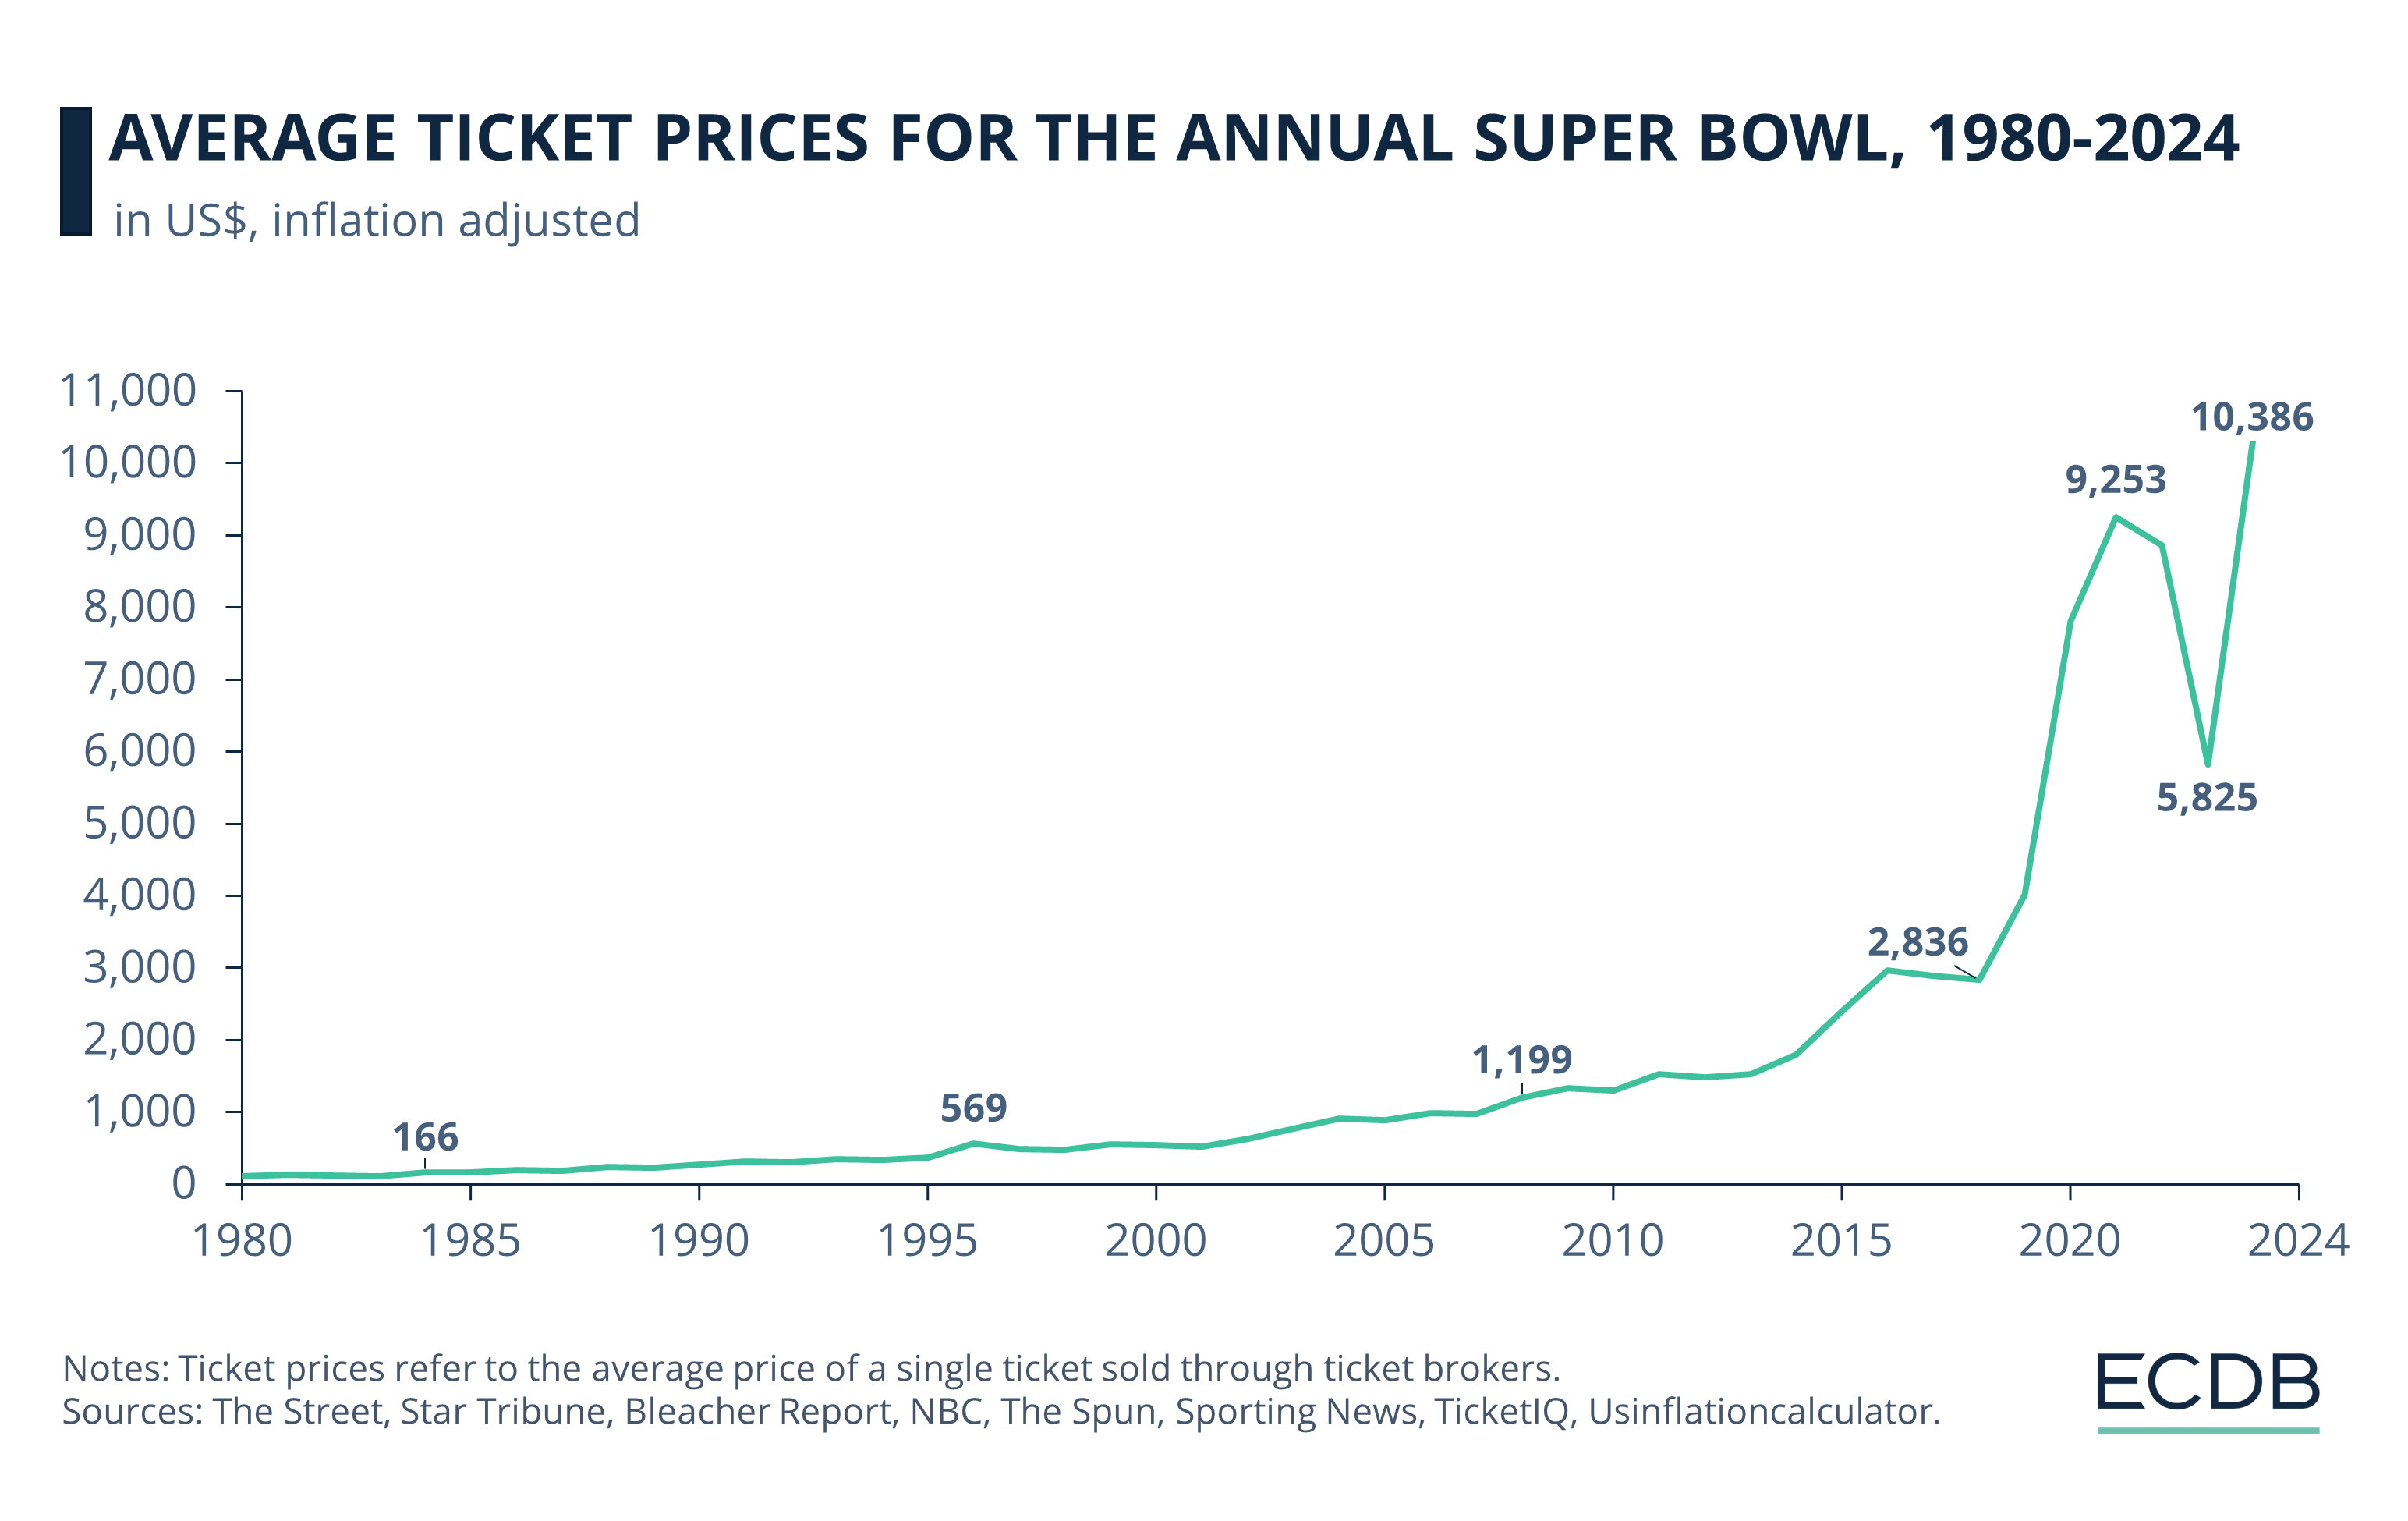 Average Ticket Prices for the Annual Super Bowl, 1980-2024